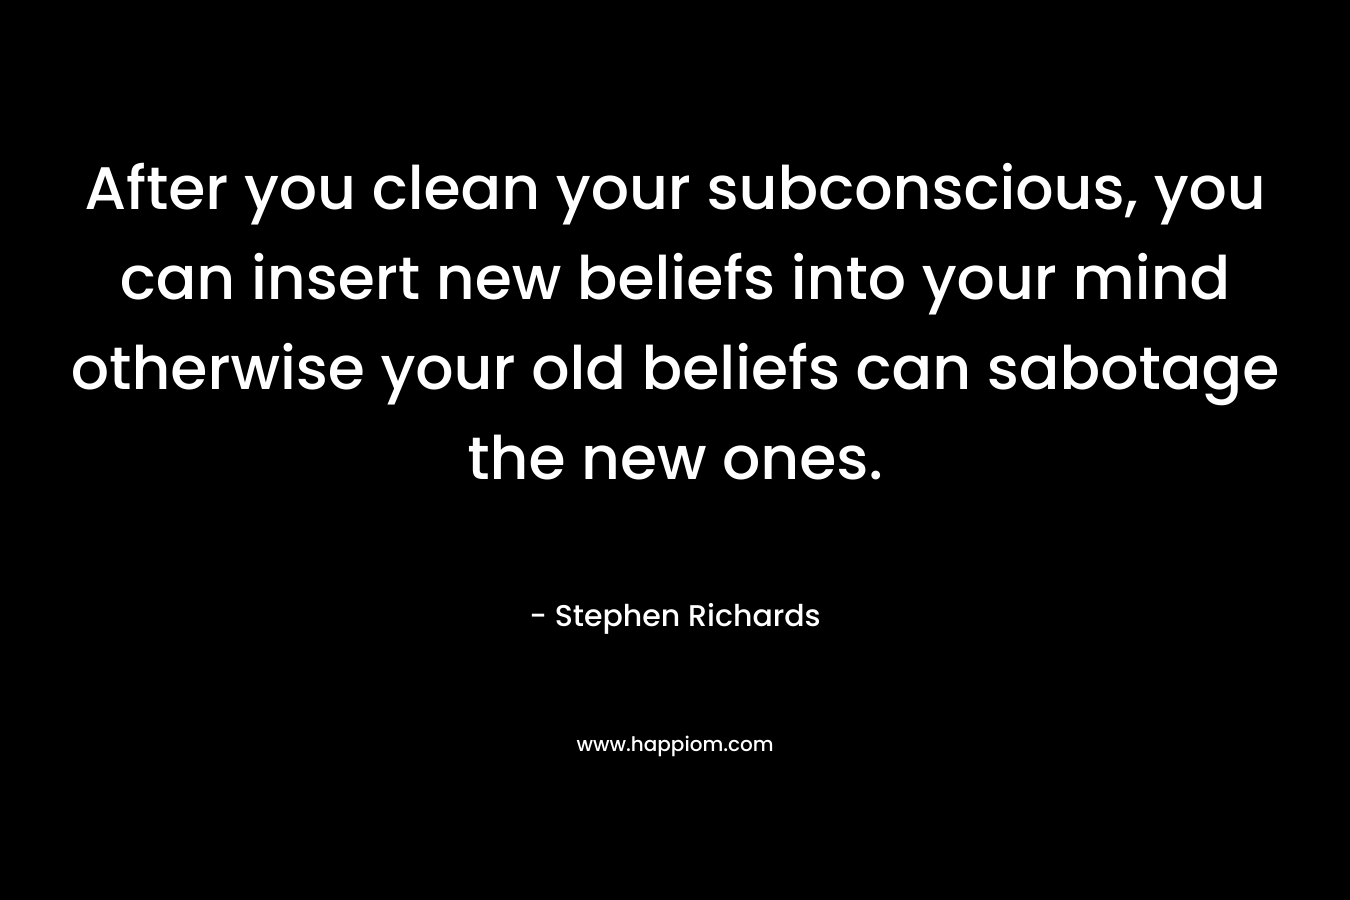 After you clean your subconscious, you can insert new beliefs into your mind otherwise your old beliefs can sabotage the new ones.